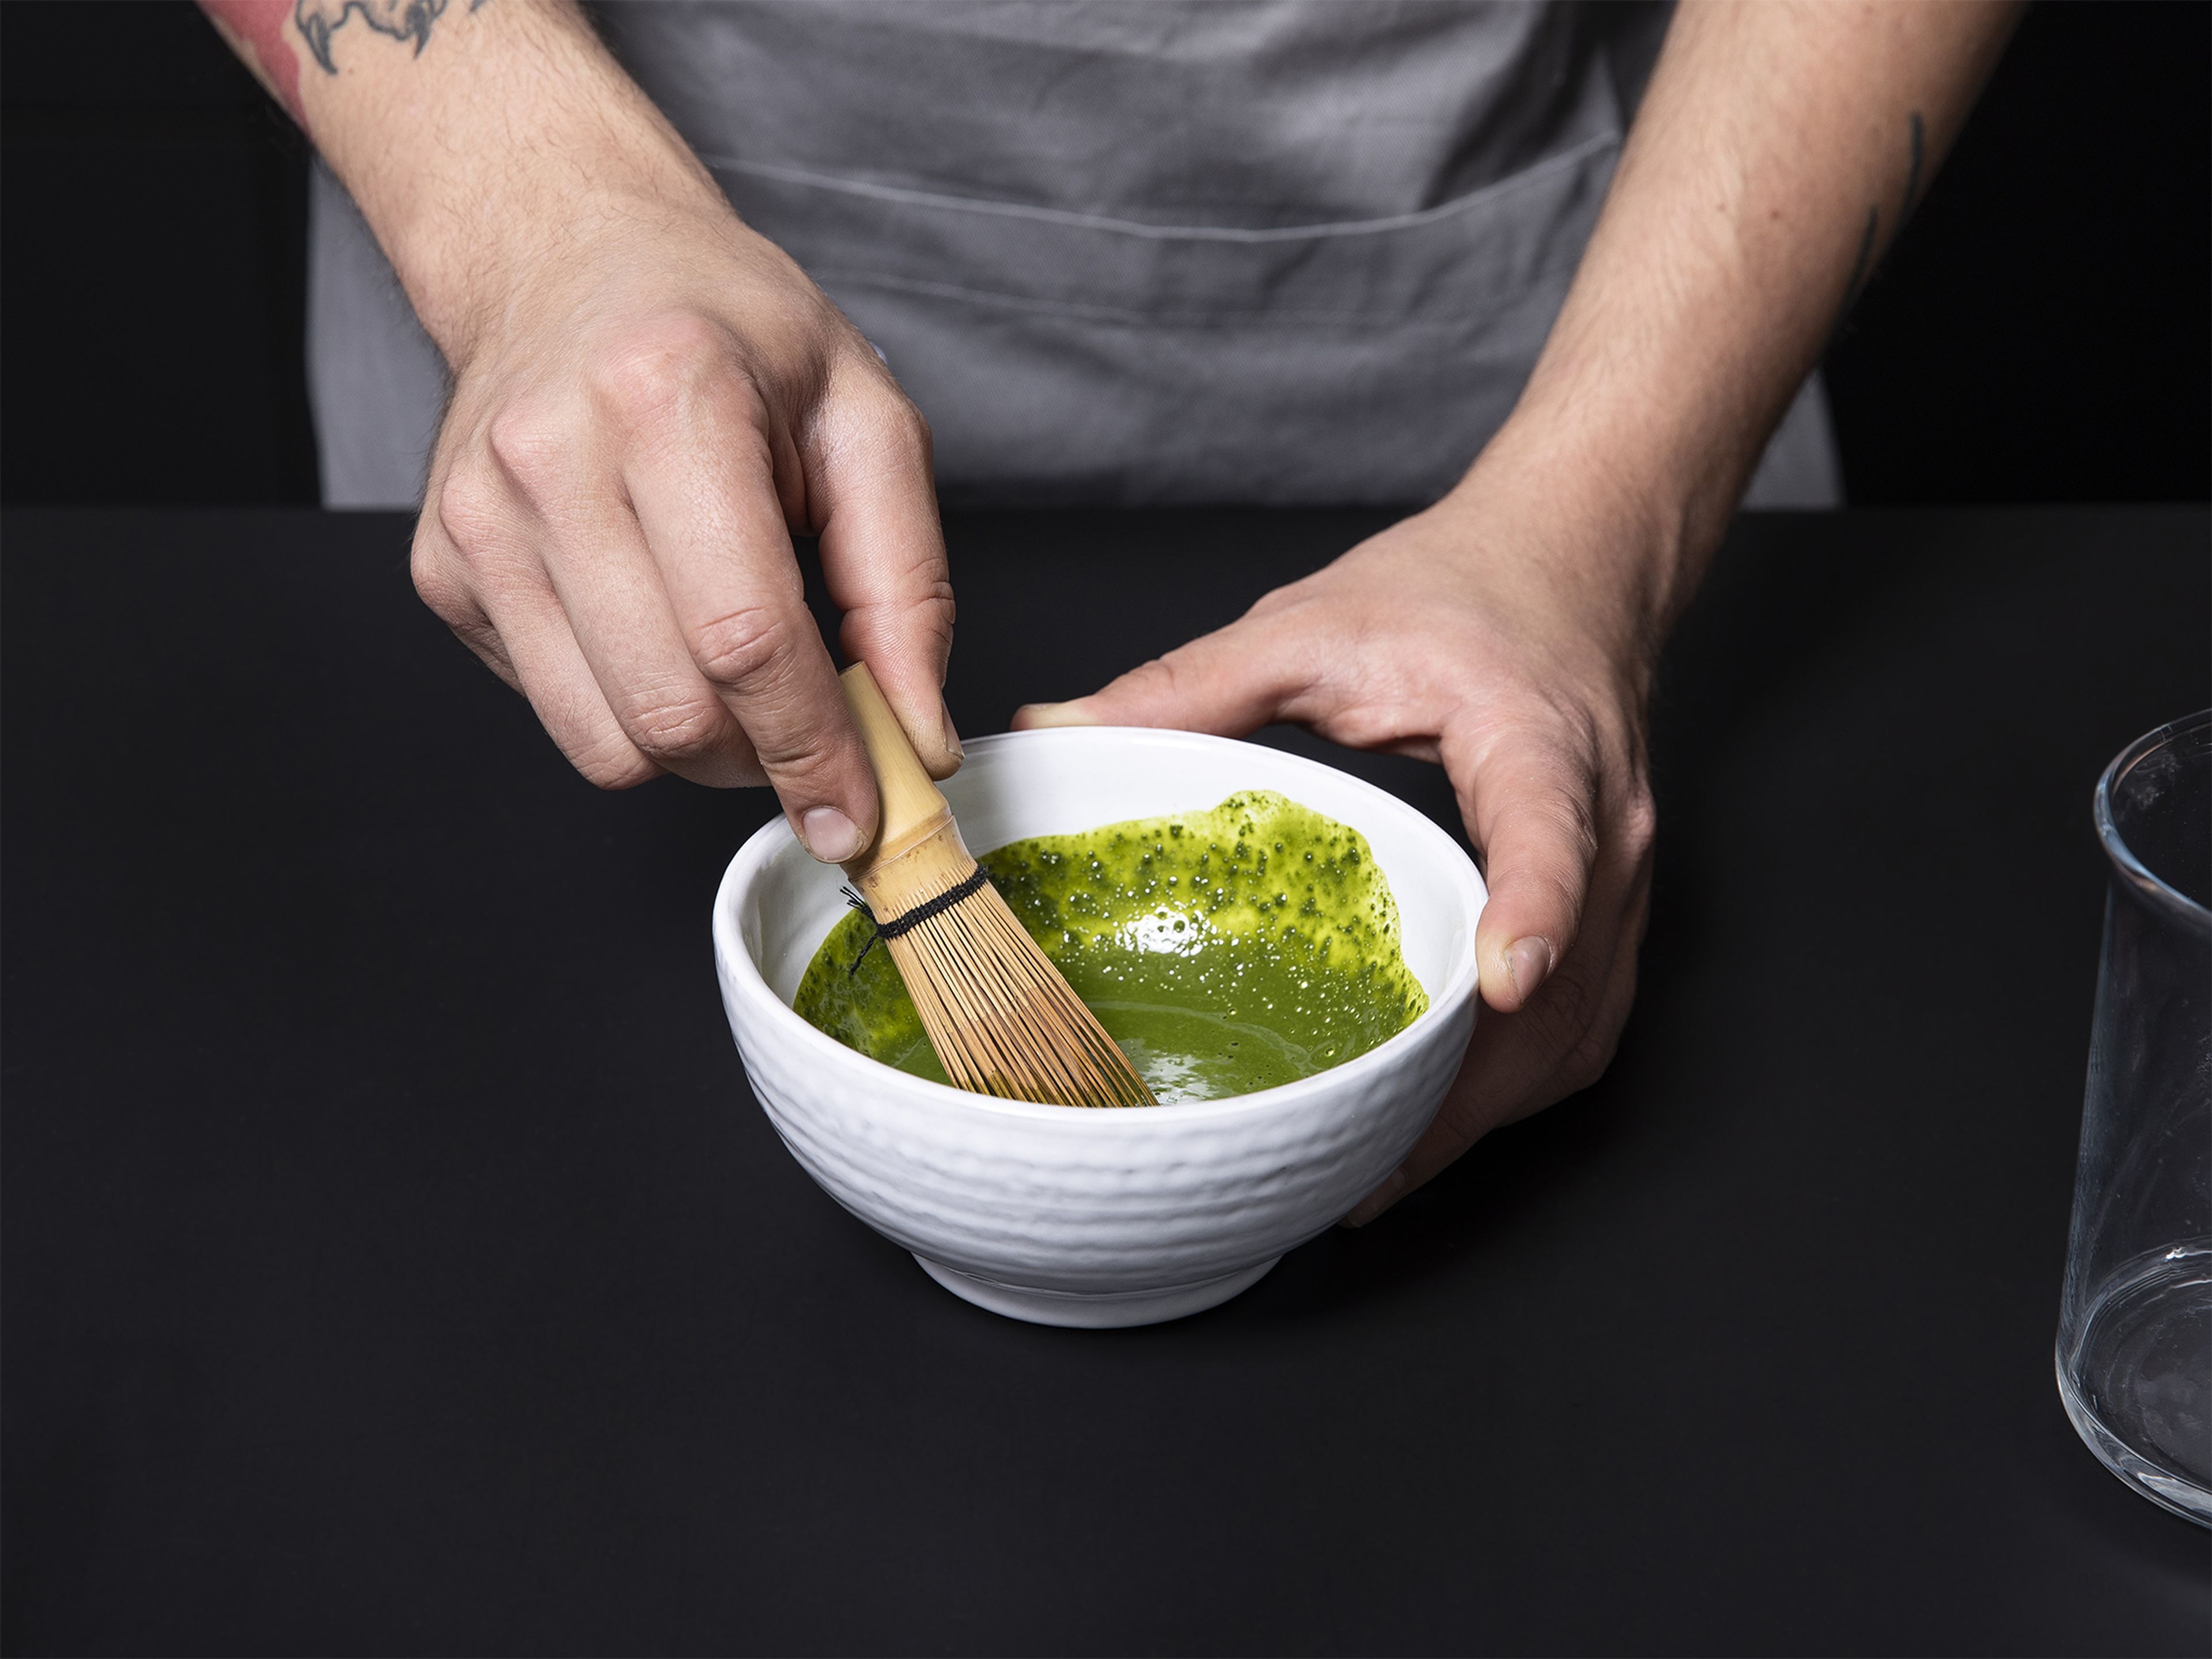 Add matcha powder to a small bowl. Use a matcha whisk to mix matcha with some hot water until smooth. Once smooth, add the rest of the hot water.